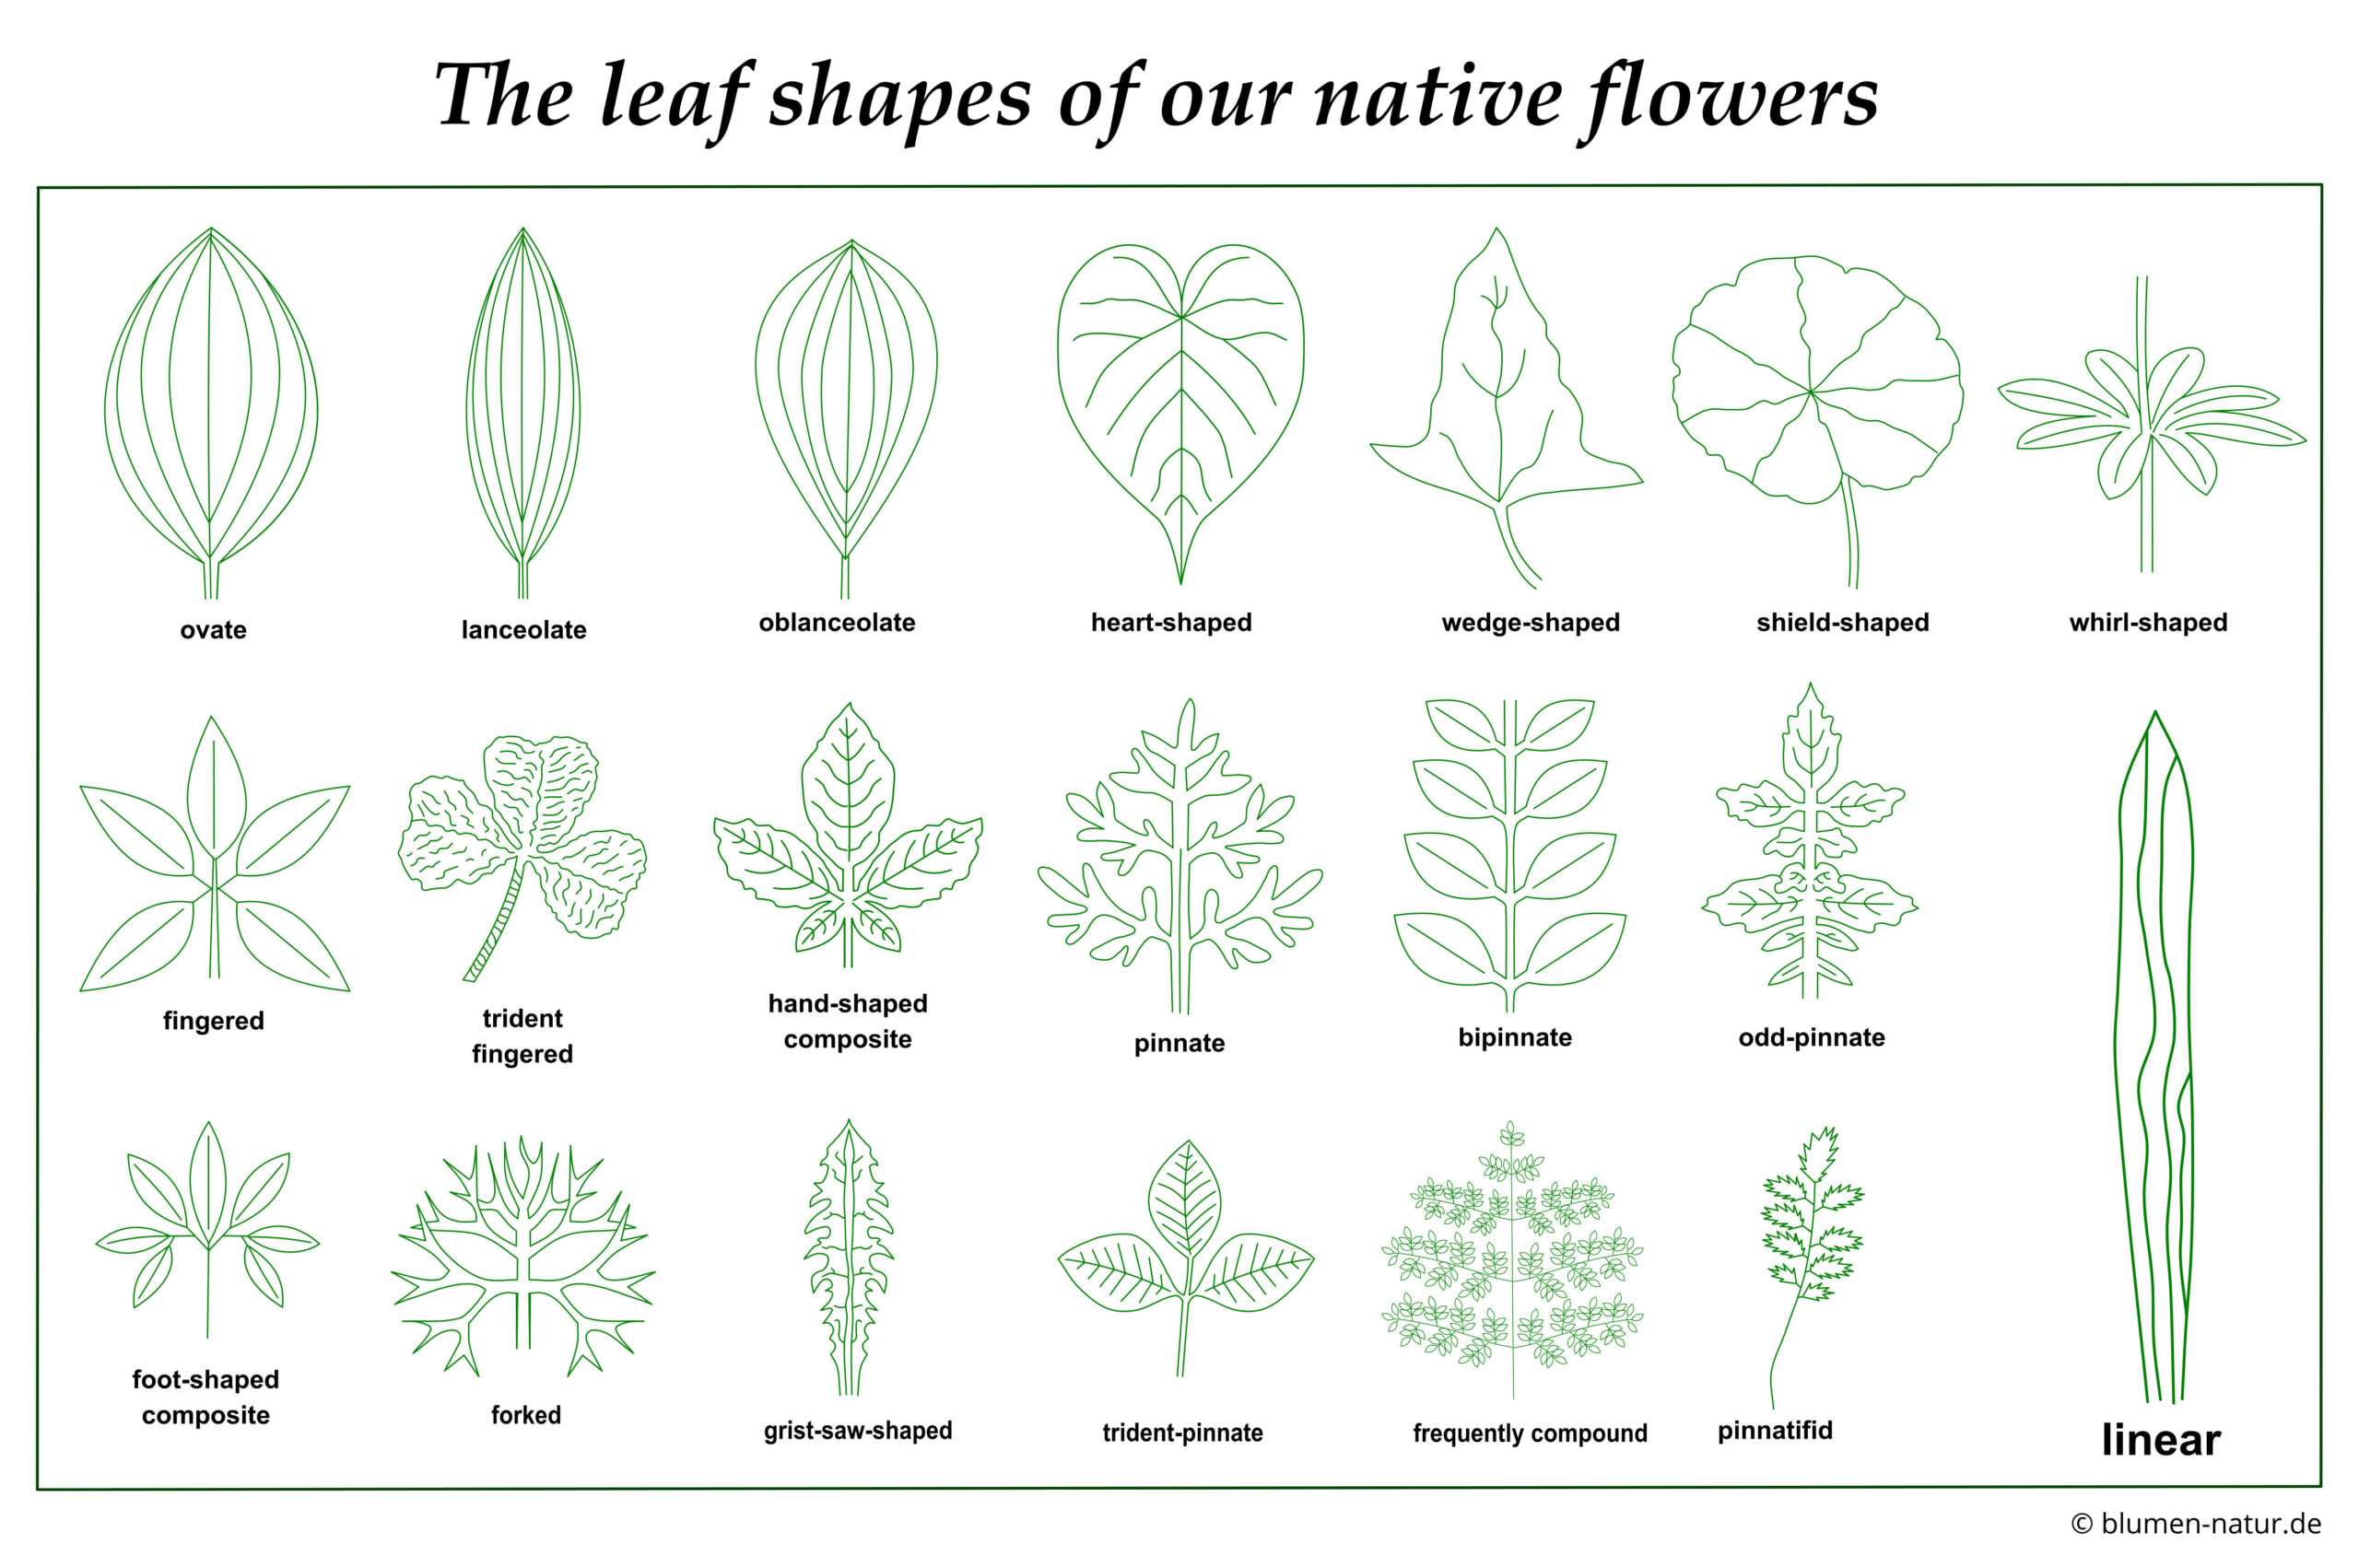 The leaf shapes of our native flowers with special terminology